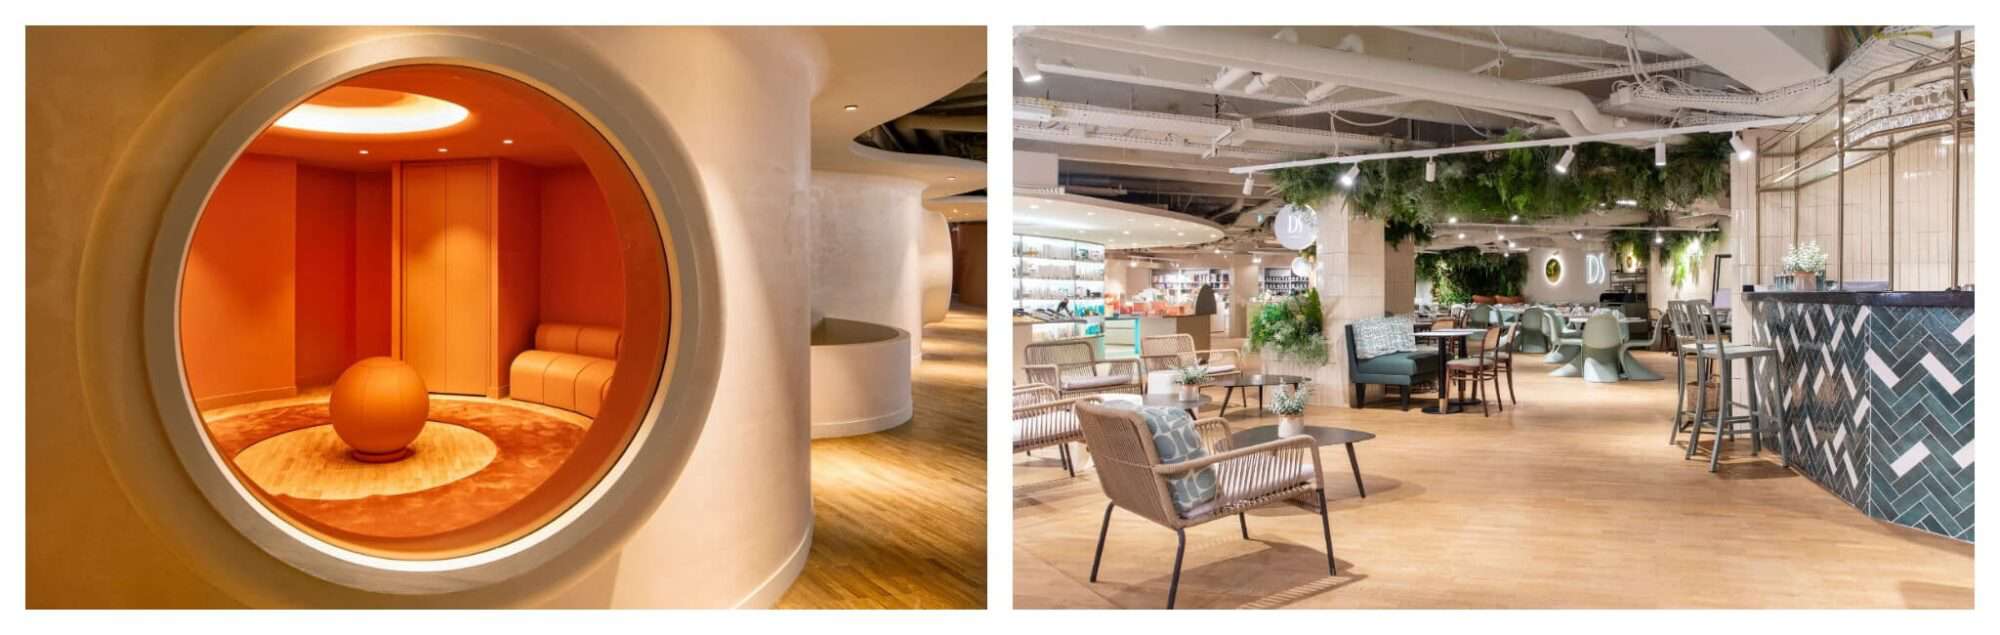 Left: the 70's inspired bubble shaped lounges in the Wellness Gallery of the Gallery Lafayettes; right: the DS café inside the store, with a garden inspired interior.
